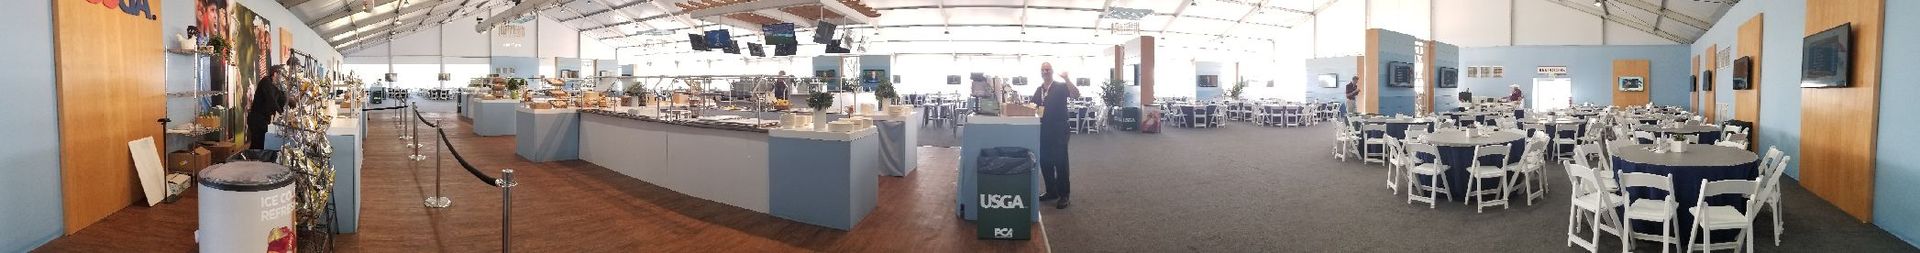 The tent Marino worked in at the 2018 U.S. Open.